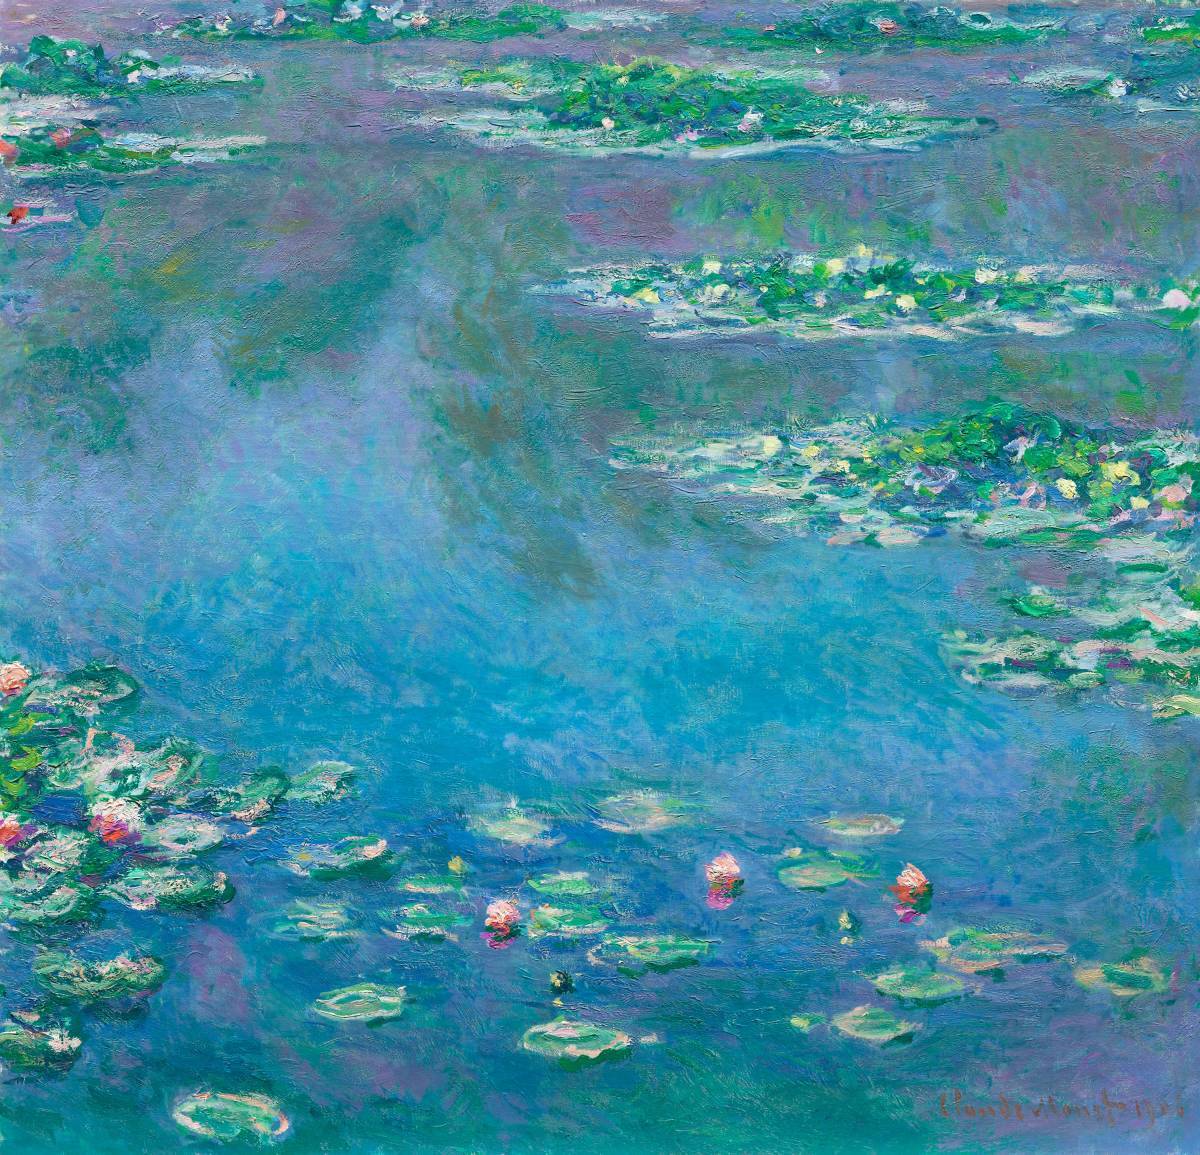 New high-quality print of Monet's Water Lilies Large A3 size No frame Special price 1800 yen (shipping included) Buy it now, Artwork, Painting, others